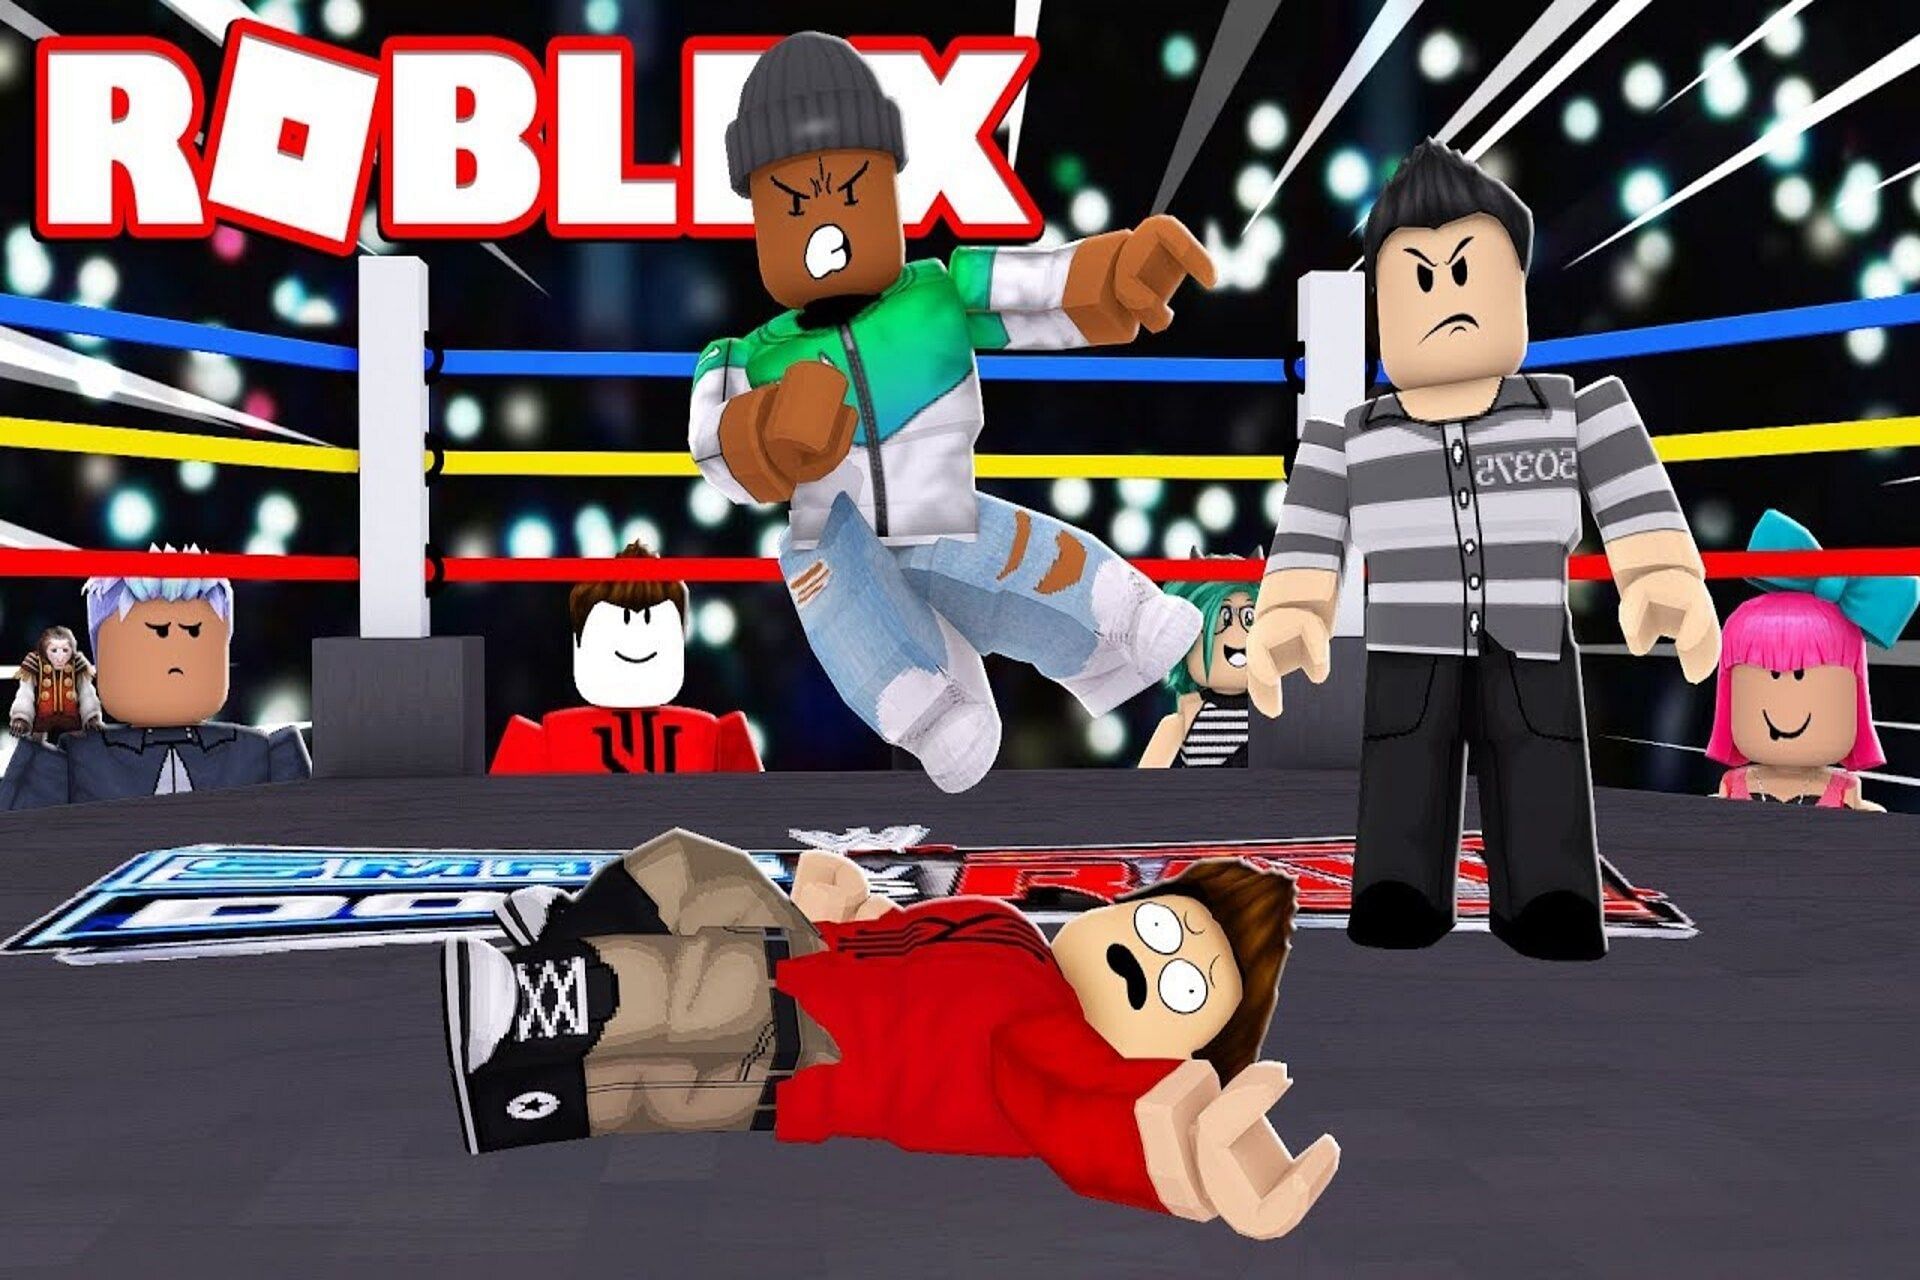 roblox playstation 4 boxing game｜TikTok Search